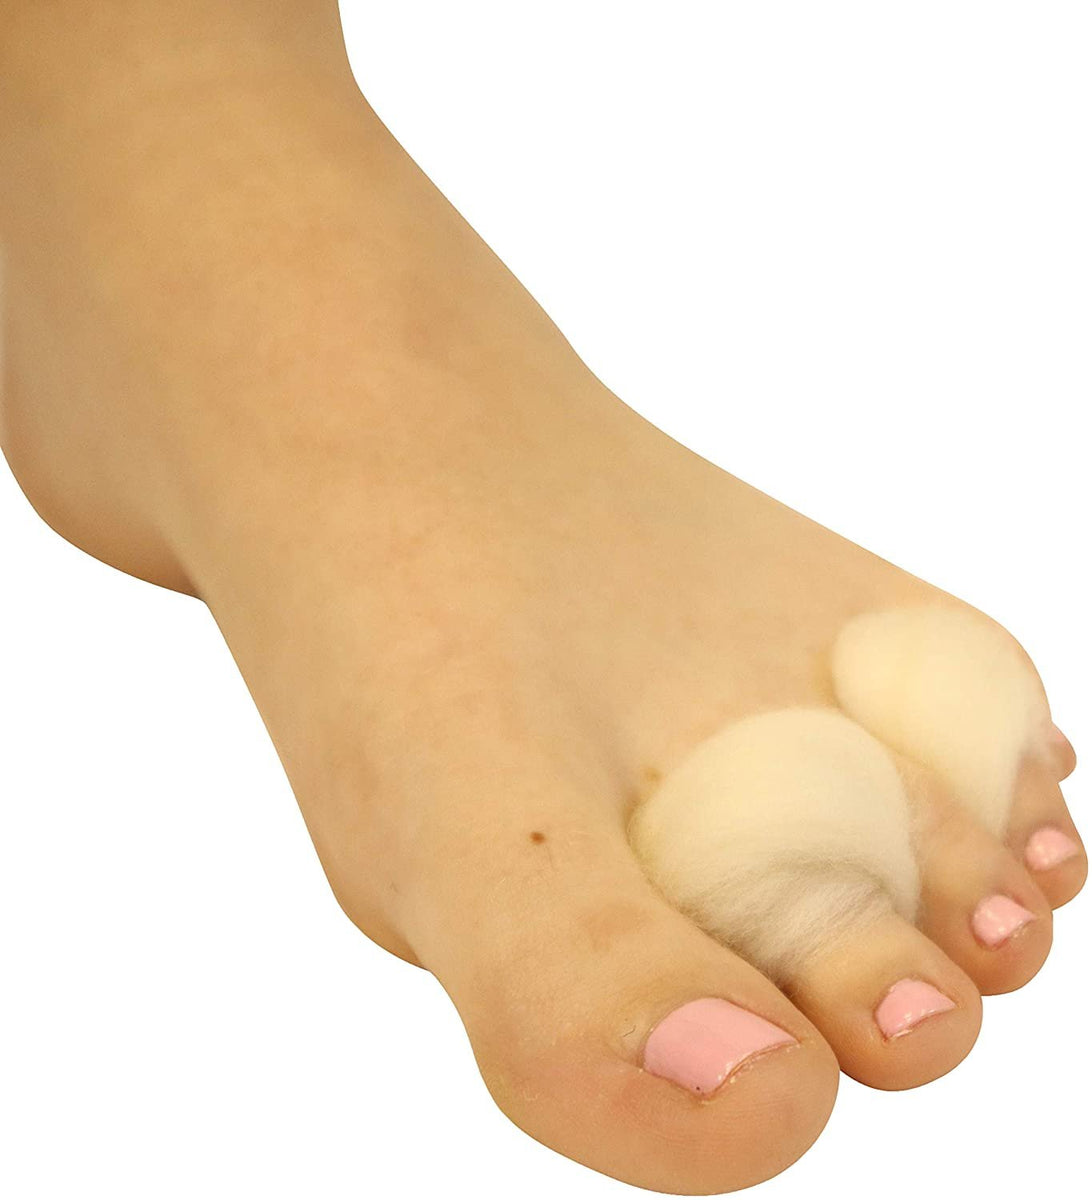 Lambs Wool for Toes Soft Feet Cushion Toe Separator Lambs Wool Corn Cushion  Pads Blister Prevention Bunions Callus Remover Cushions Hammer Toe Relief  for Shoes or Feet 3/8 oz (4 Pcs)